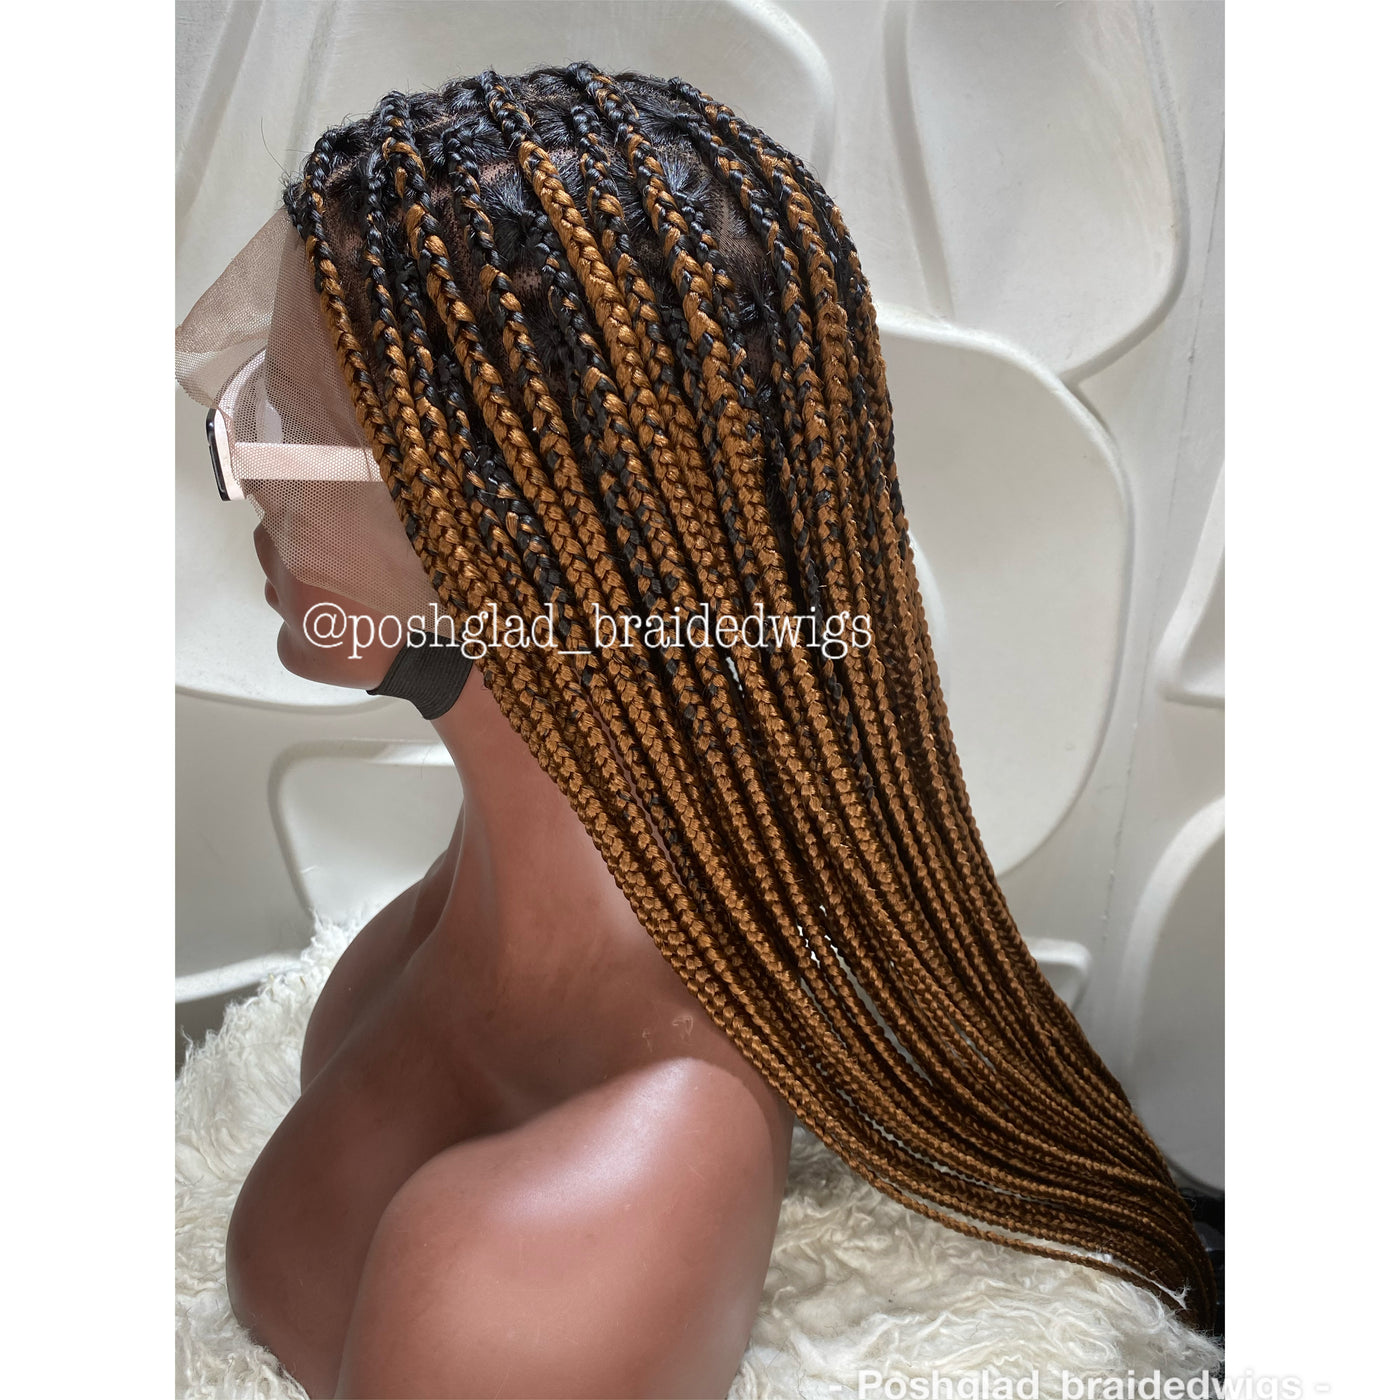 Knotless Braid Wig - Full Lace Ombre - Majida Poshglad Braided Wigs Knotless Braid Wig